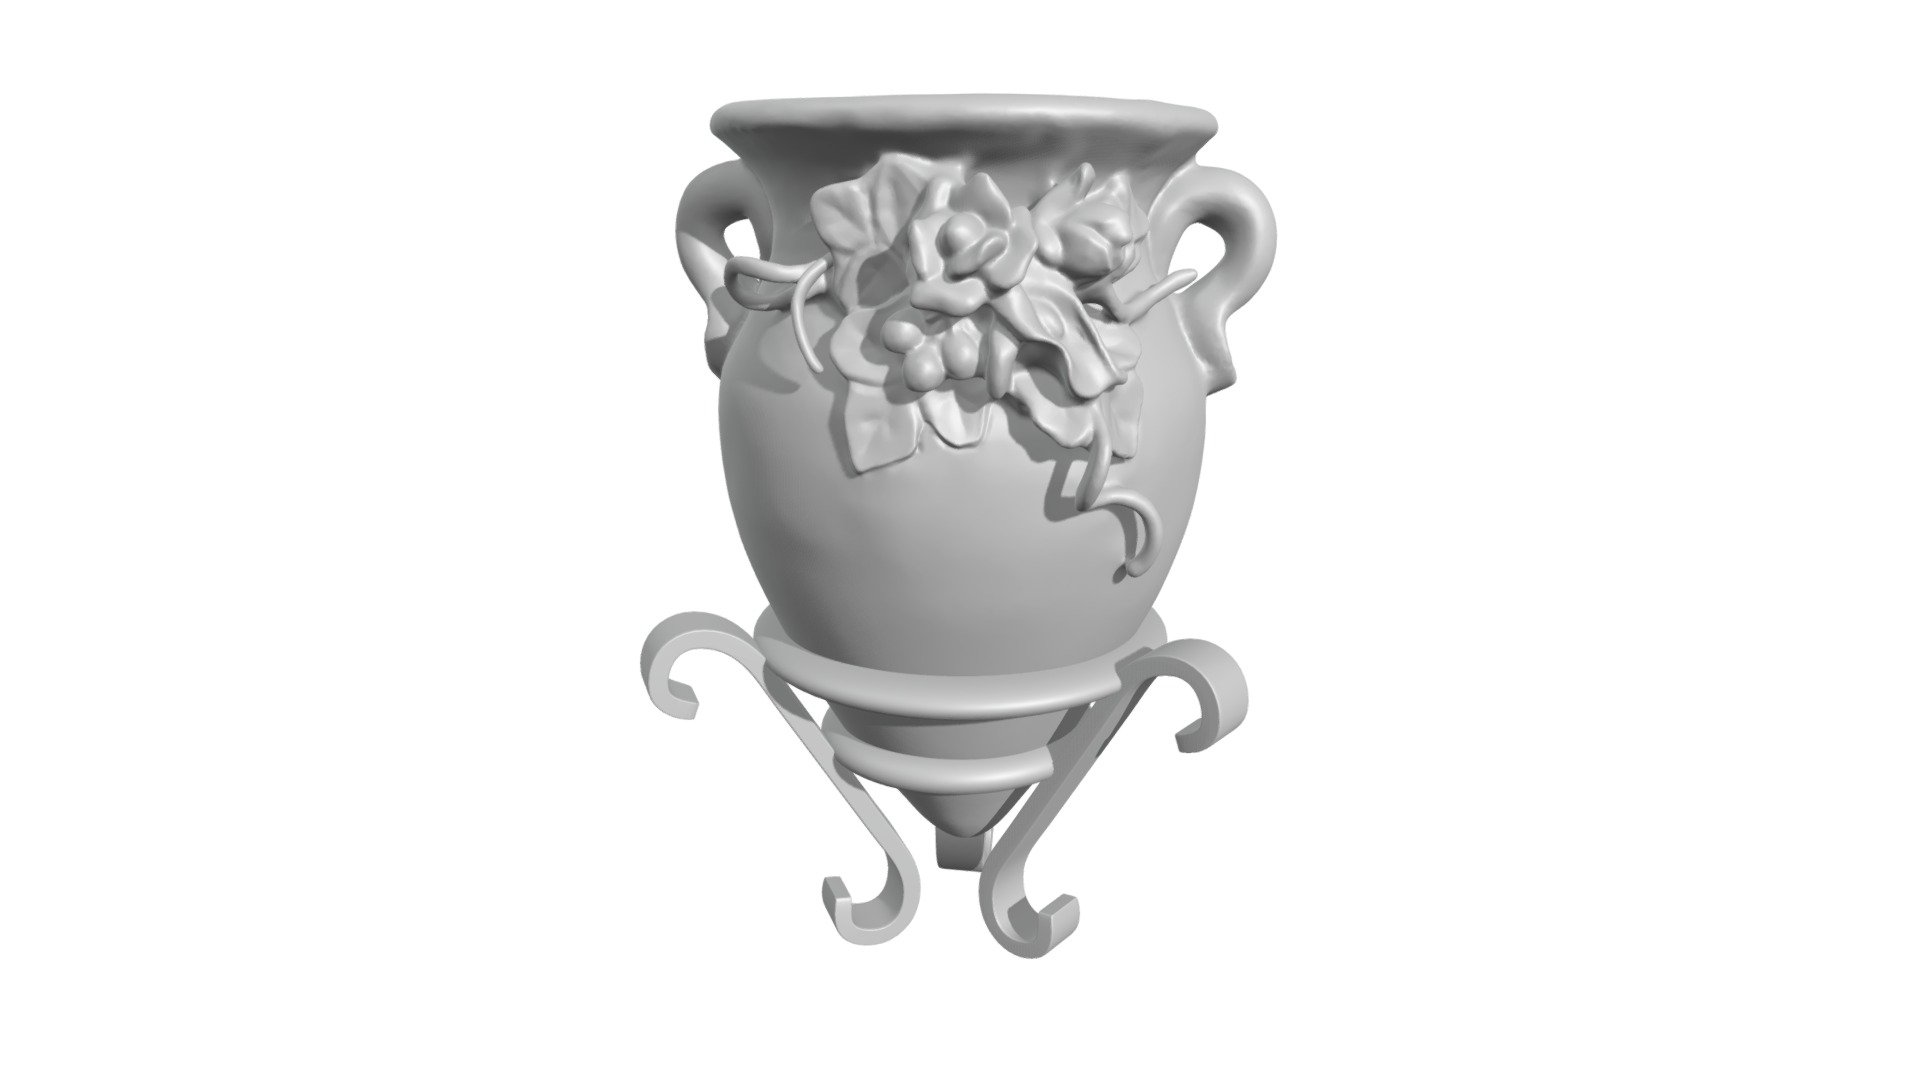 Vase with pedestal 

STL Model for 3D Printing.

Contact me for any question.

Came to see my other work.

If you get this model, I encourage you to give me feedback, just send me a message on instagram, I’d very happy to help or hear your feedback and pictures :)

For other custom products, please contact me, I would be glad to help you, I accept non or exclusive commissions.

If you like my art, please support me by purchasing my models, or following me on social media:

Instagram: https://www.instagram.com/animaartistspieces/

TikTok: https://www.tiktok.com/@animaartistspieces?lang=it

Facebook: https://www.facebook.com/profile.php?id=100087530776989

WEBSITE: https://www.animacampania.it/site/ - Vase with pedestal - Buy Royalty Free 3D model by Anima artist's pieces (@animaartistspieces) 3d model